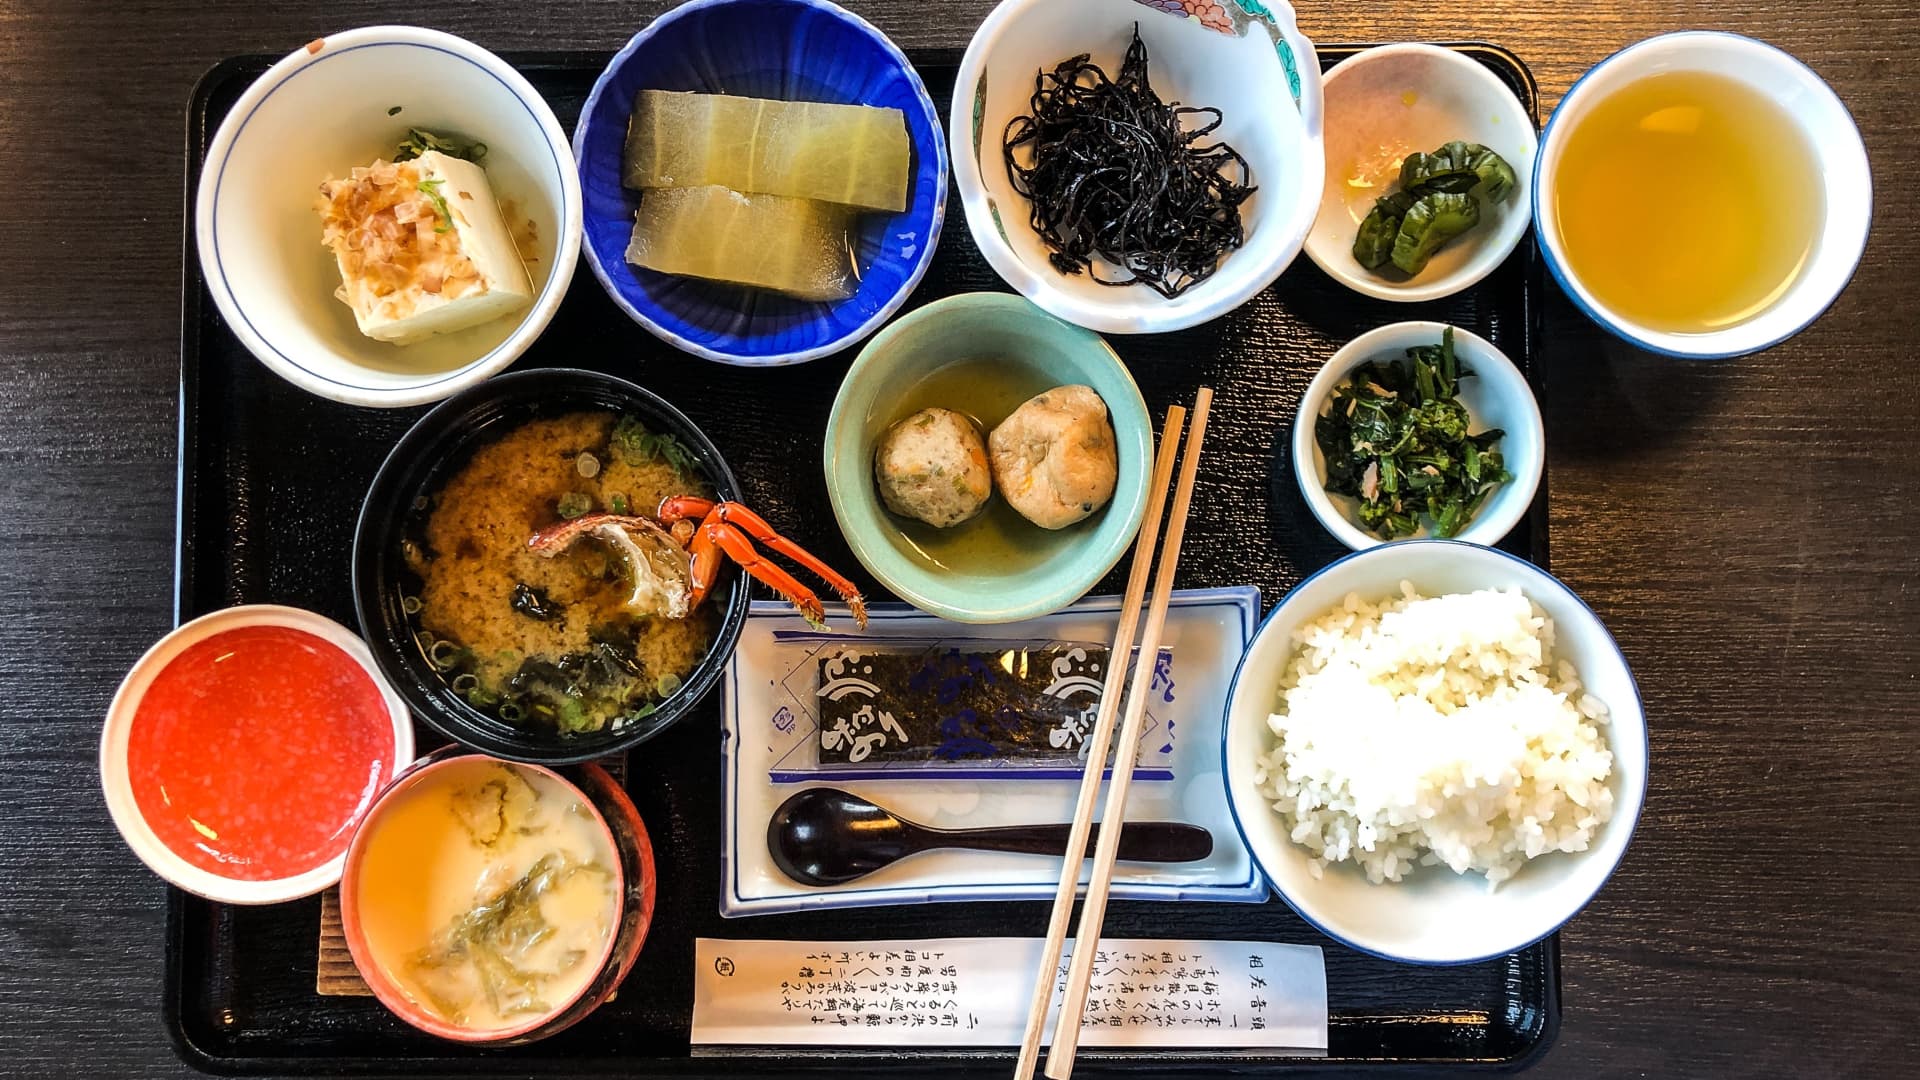 Kaiseki is a traditional multi-course Japanese dinner